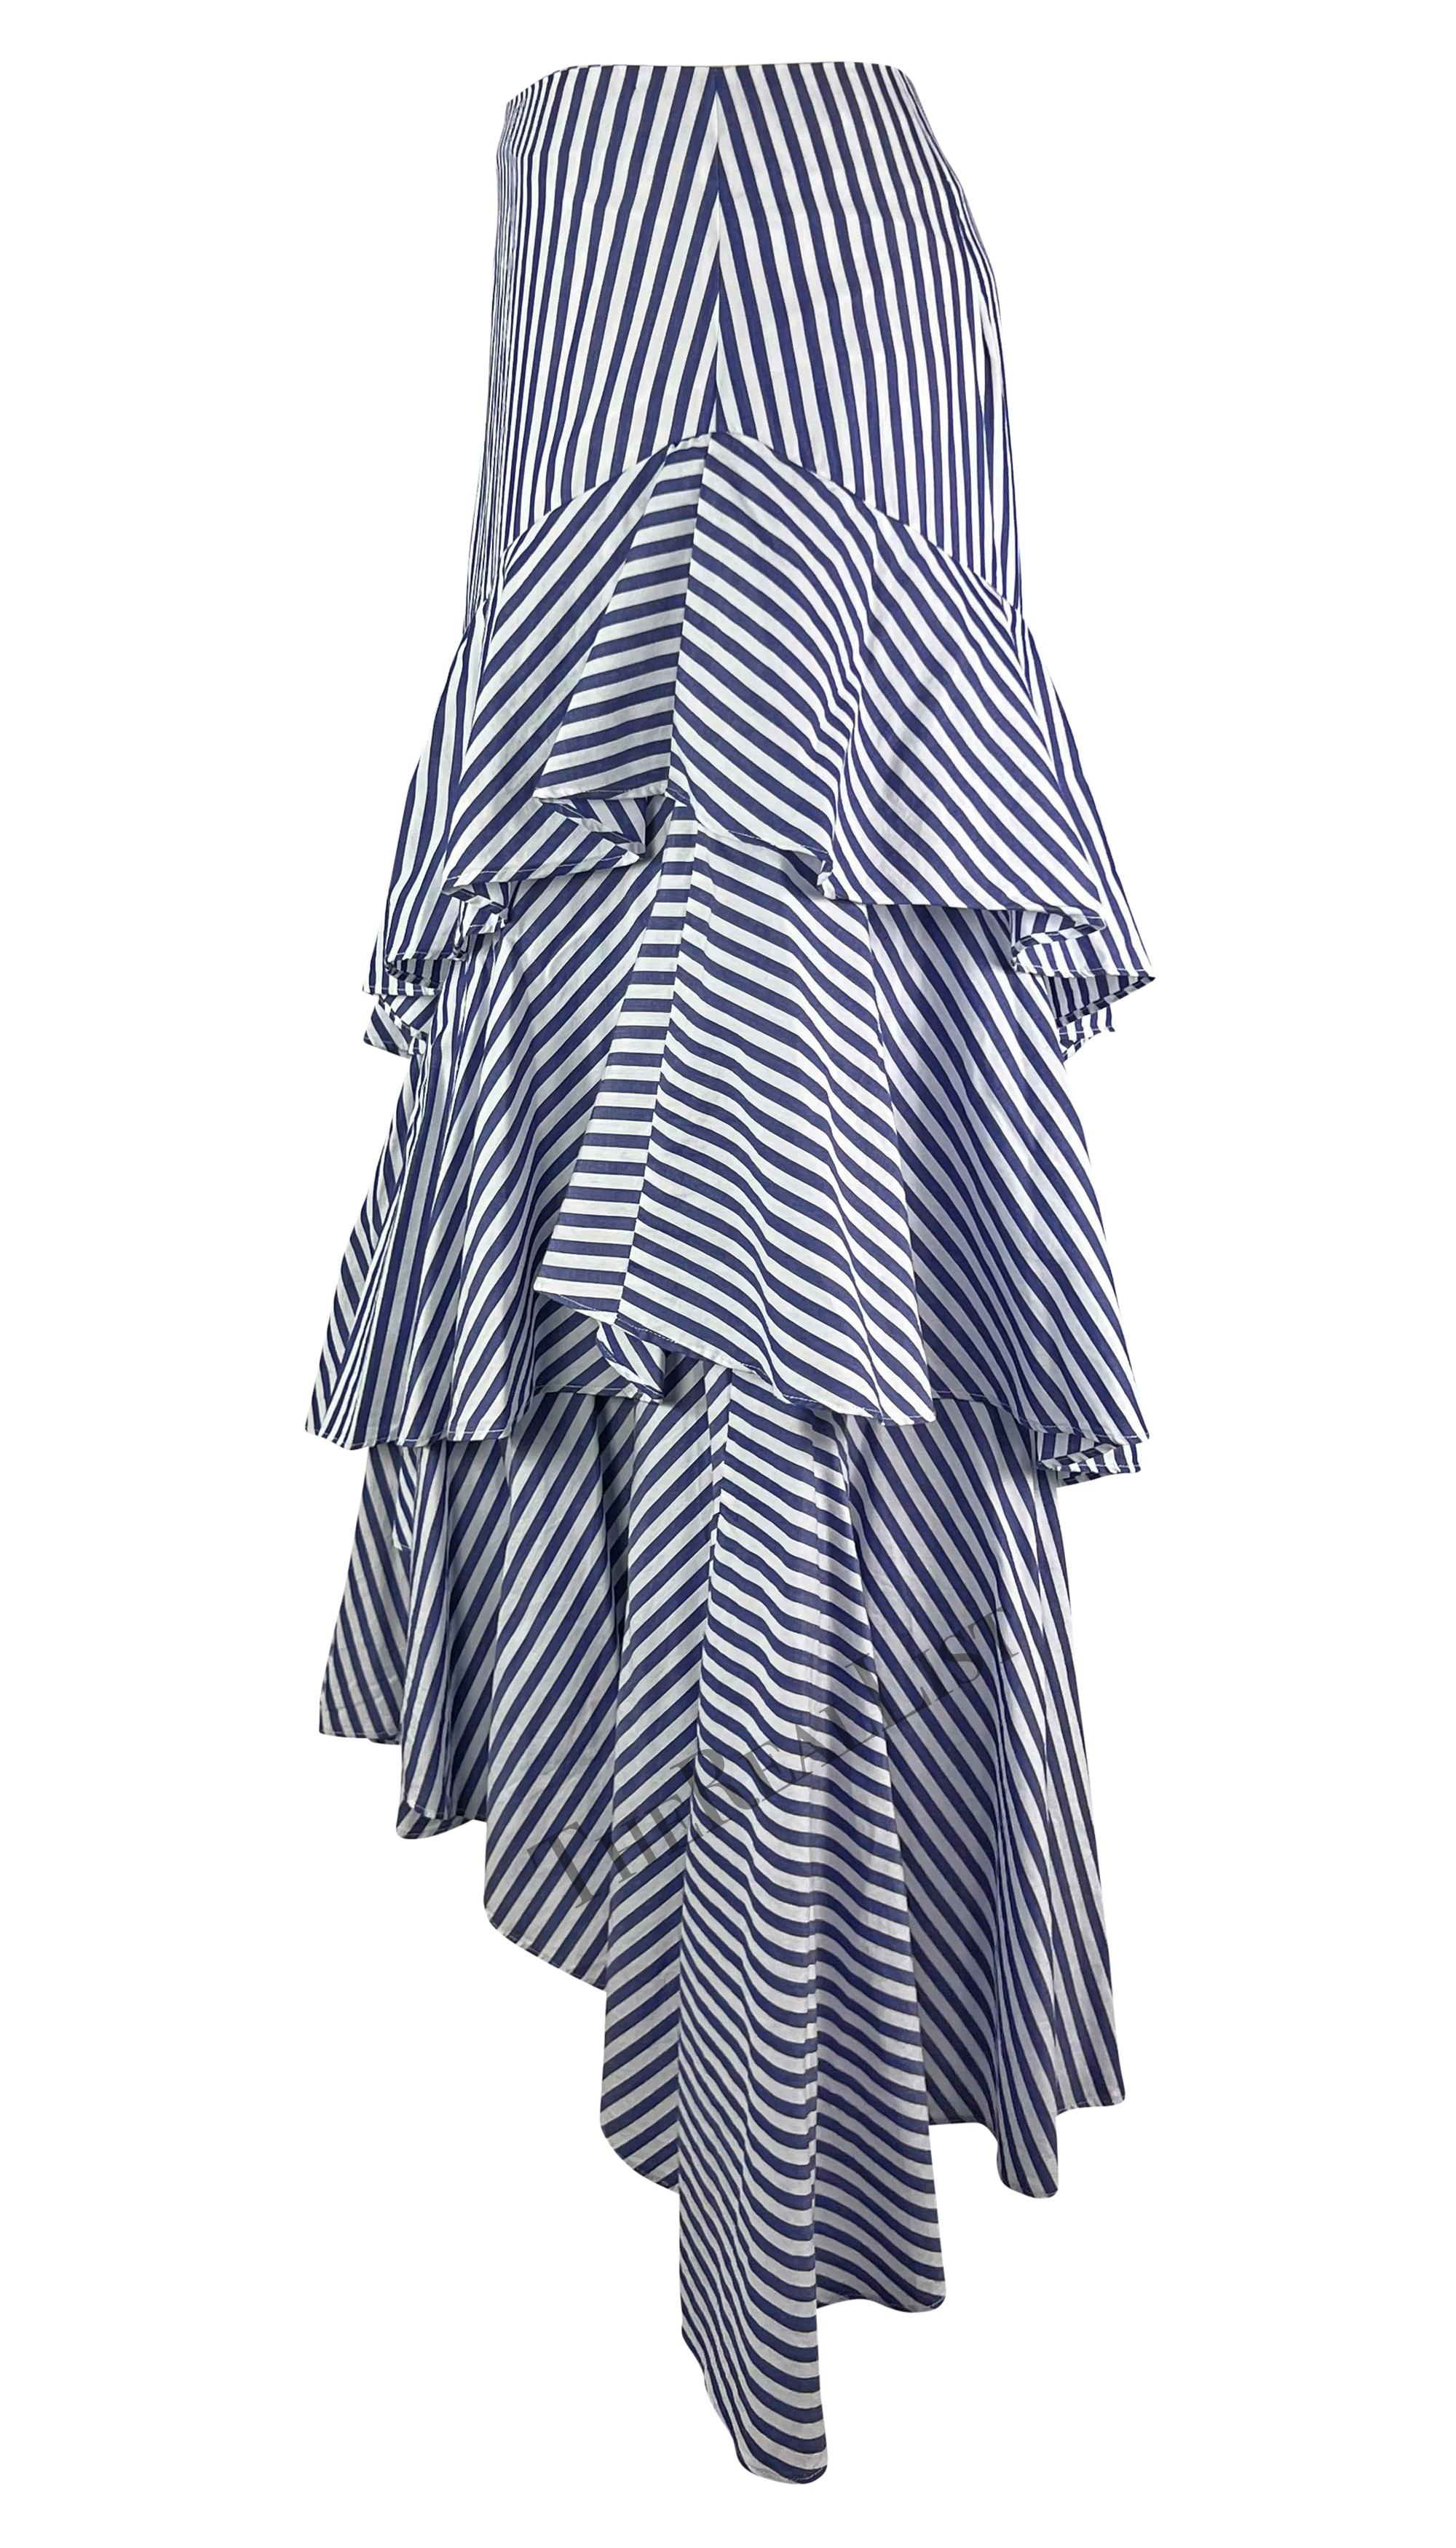 Presenting a fabulous blue and white stripe Giorgio Armani maxi skirt. From the late 1990s, this striped skirt features layers of asymmetric ruffles. Whether paired with a classic white collared shirt or crop top, this effortless, timeless, and chic